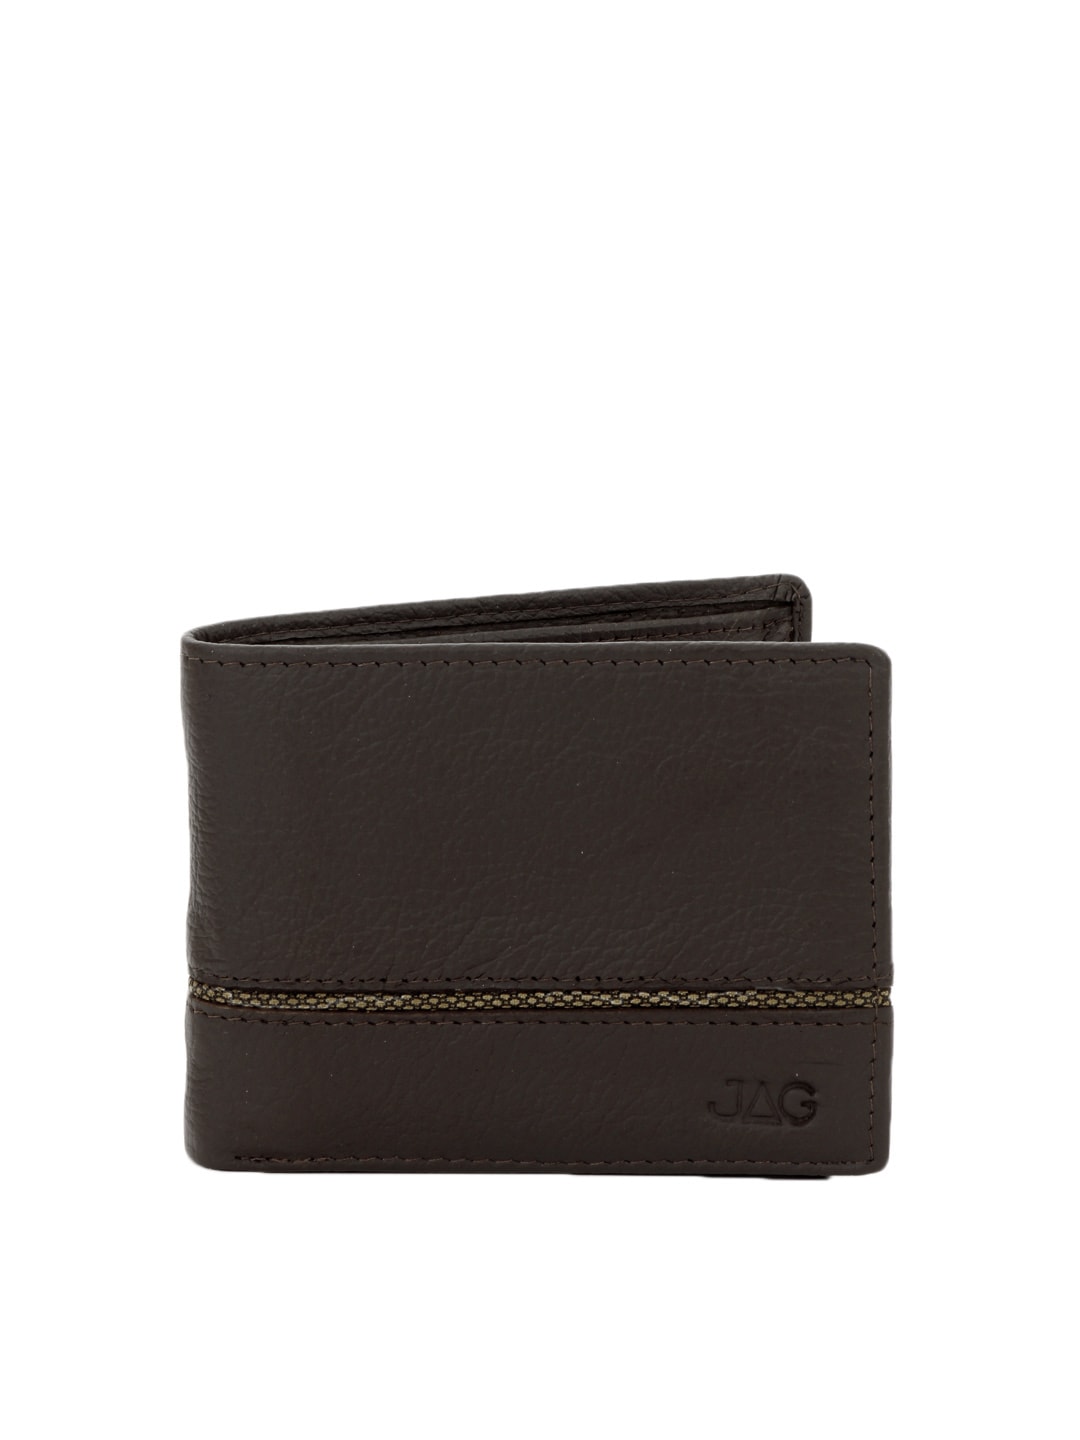 JAG Men Chocolate Brown Leather Wallet